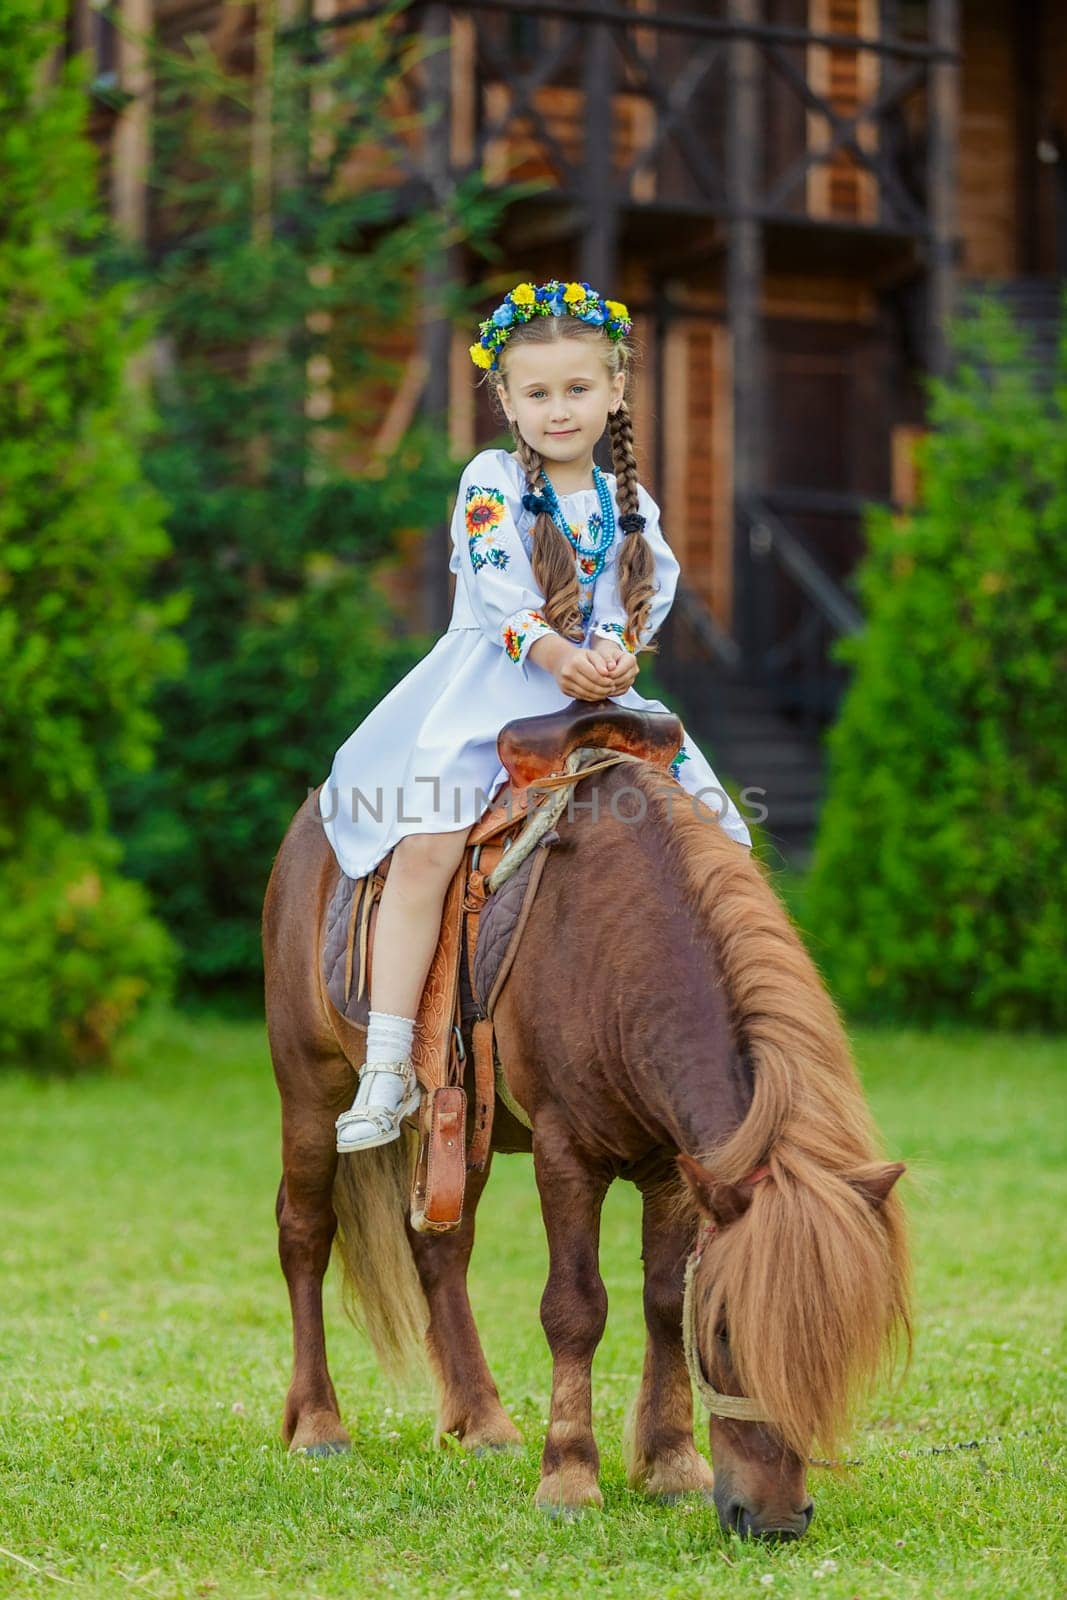 A little girl in the Ukrainian national costume rides a pony on the lawn